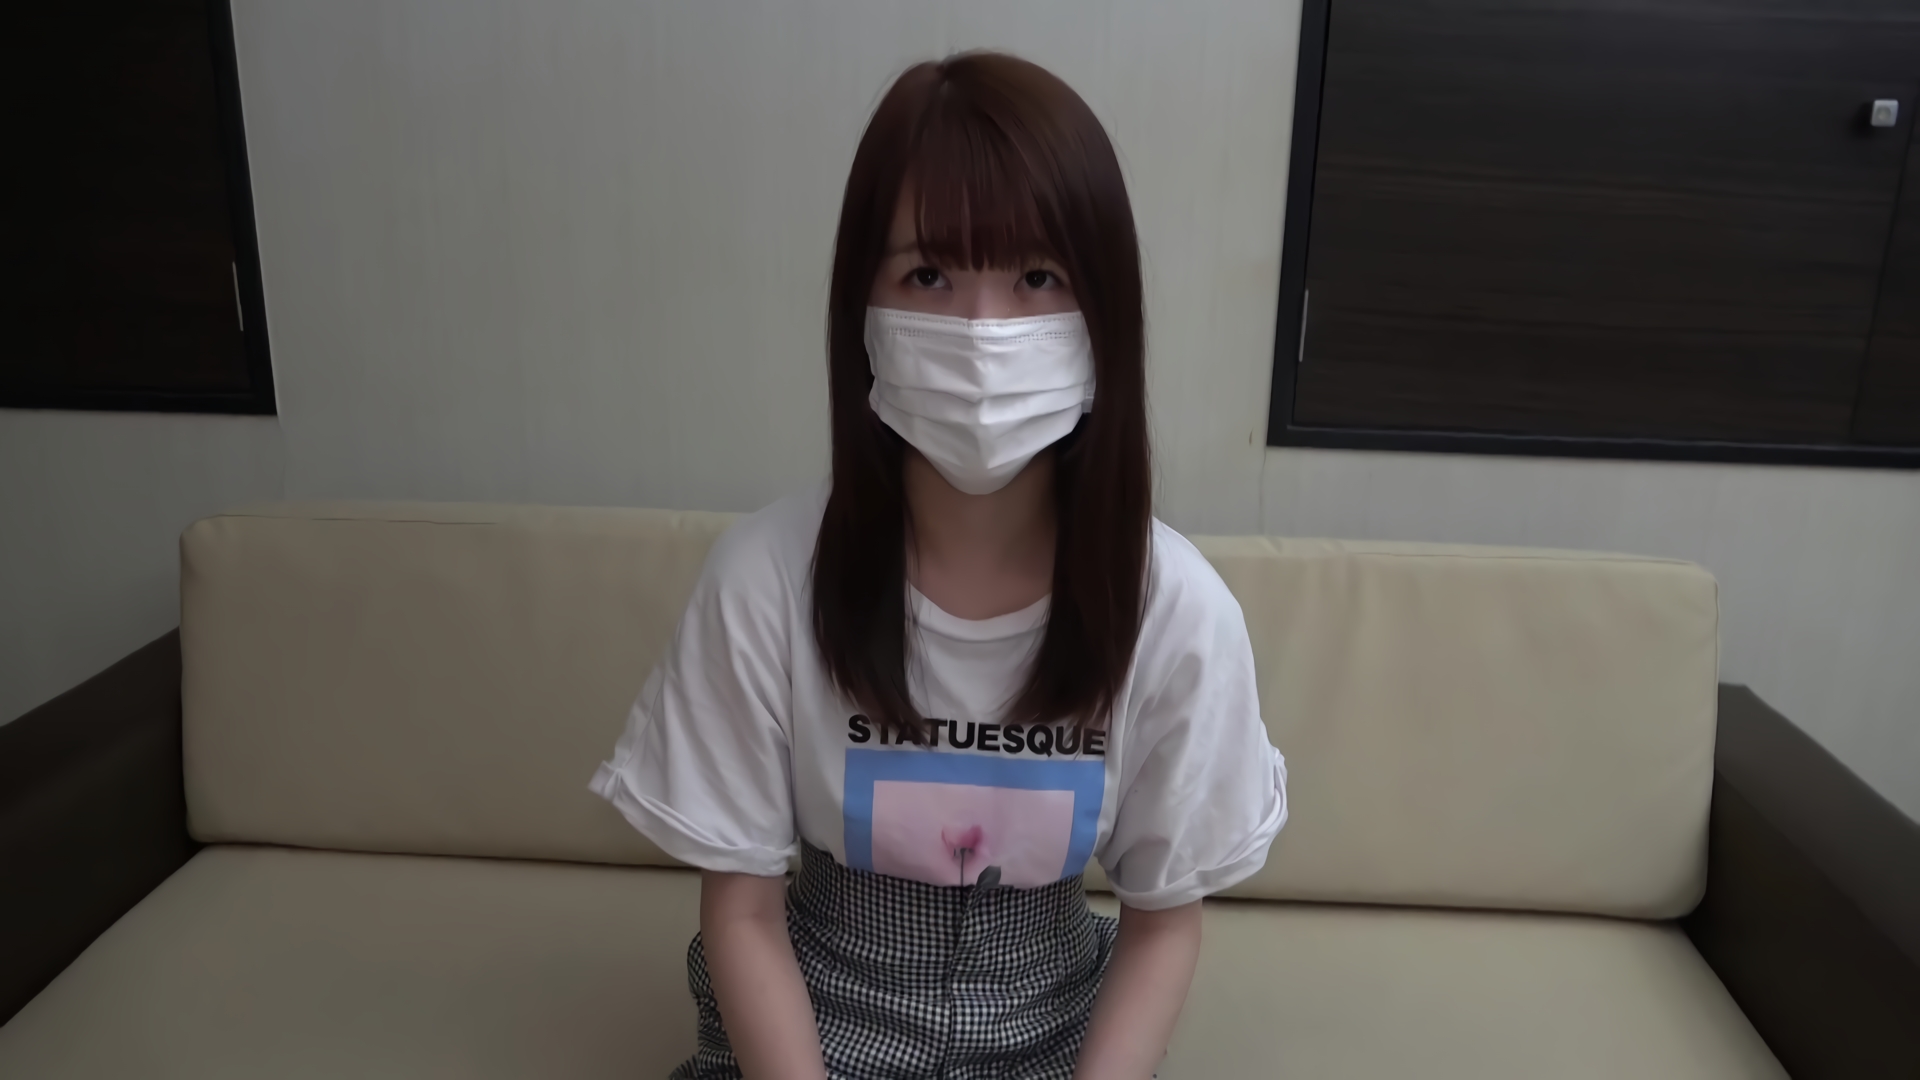 FC2 PPV 2207180 “By all means, only the face …” The 18-year-old slender beauty student of 155 cm hides